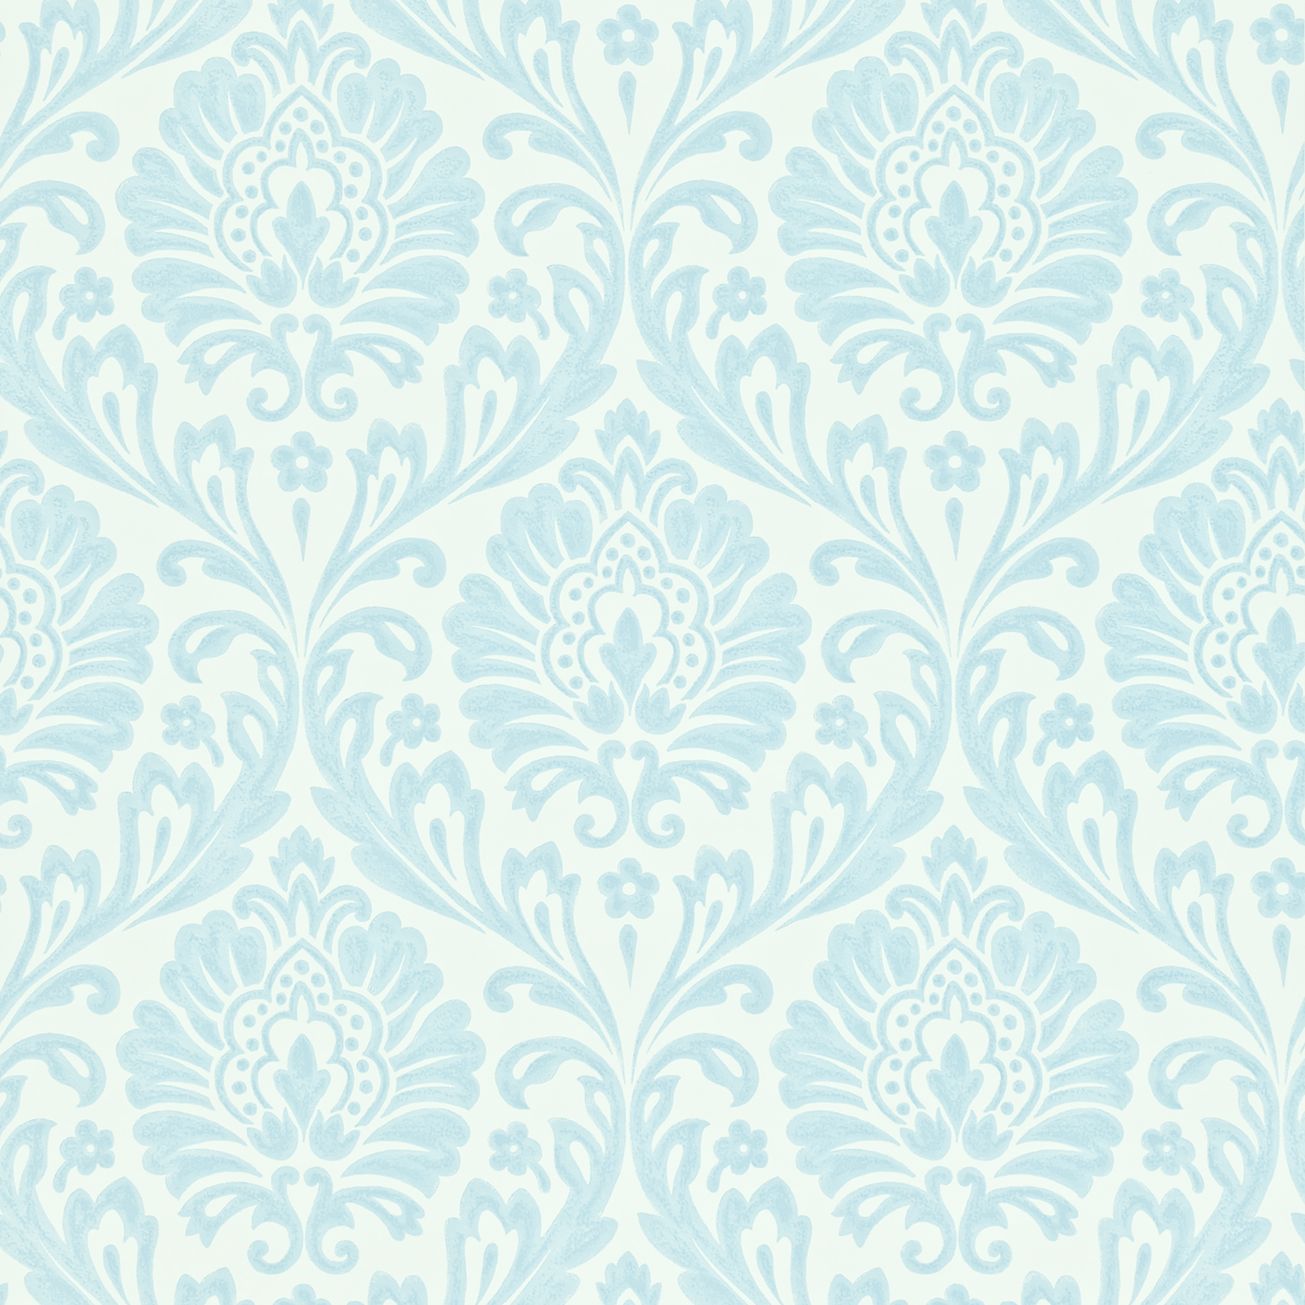  Damask Wallpaper Maycott Wallpapers Collection Sanderson Wallpaper